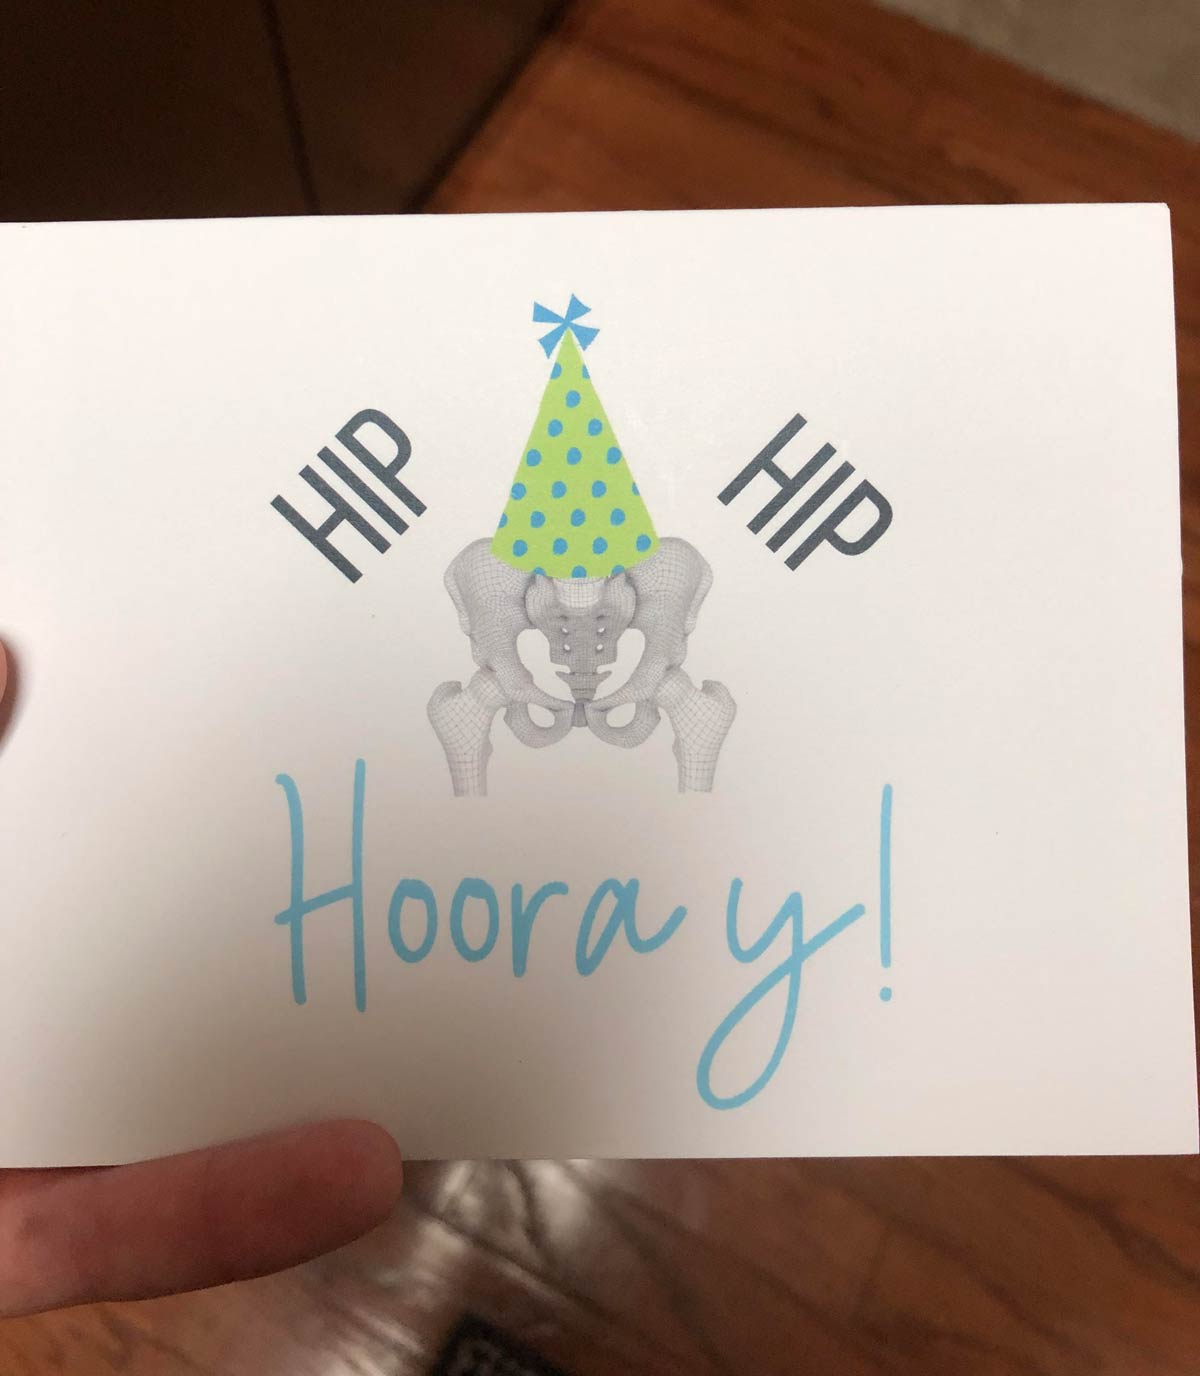 I go to pelvic floor PT. They sent me this birthday card